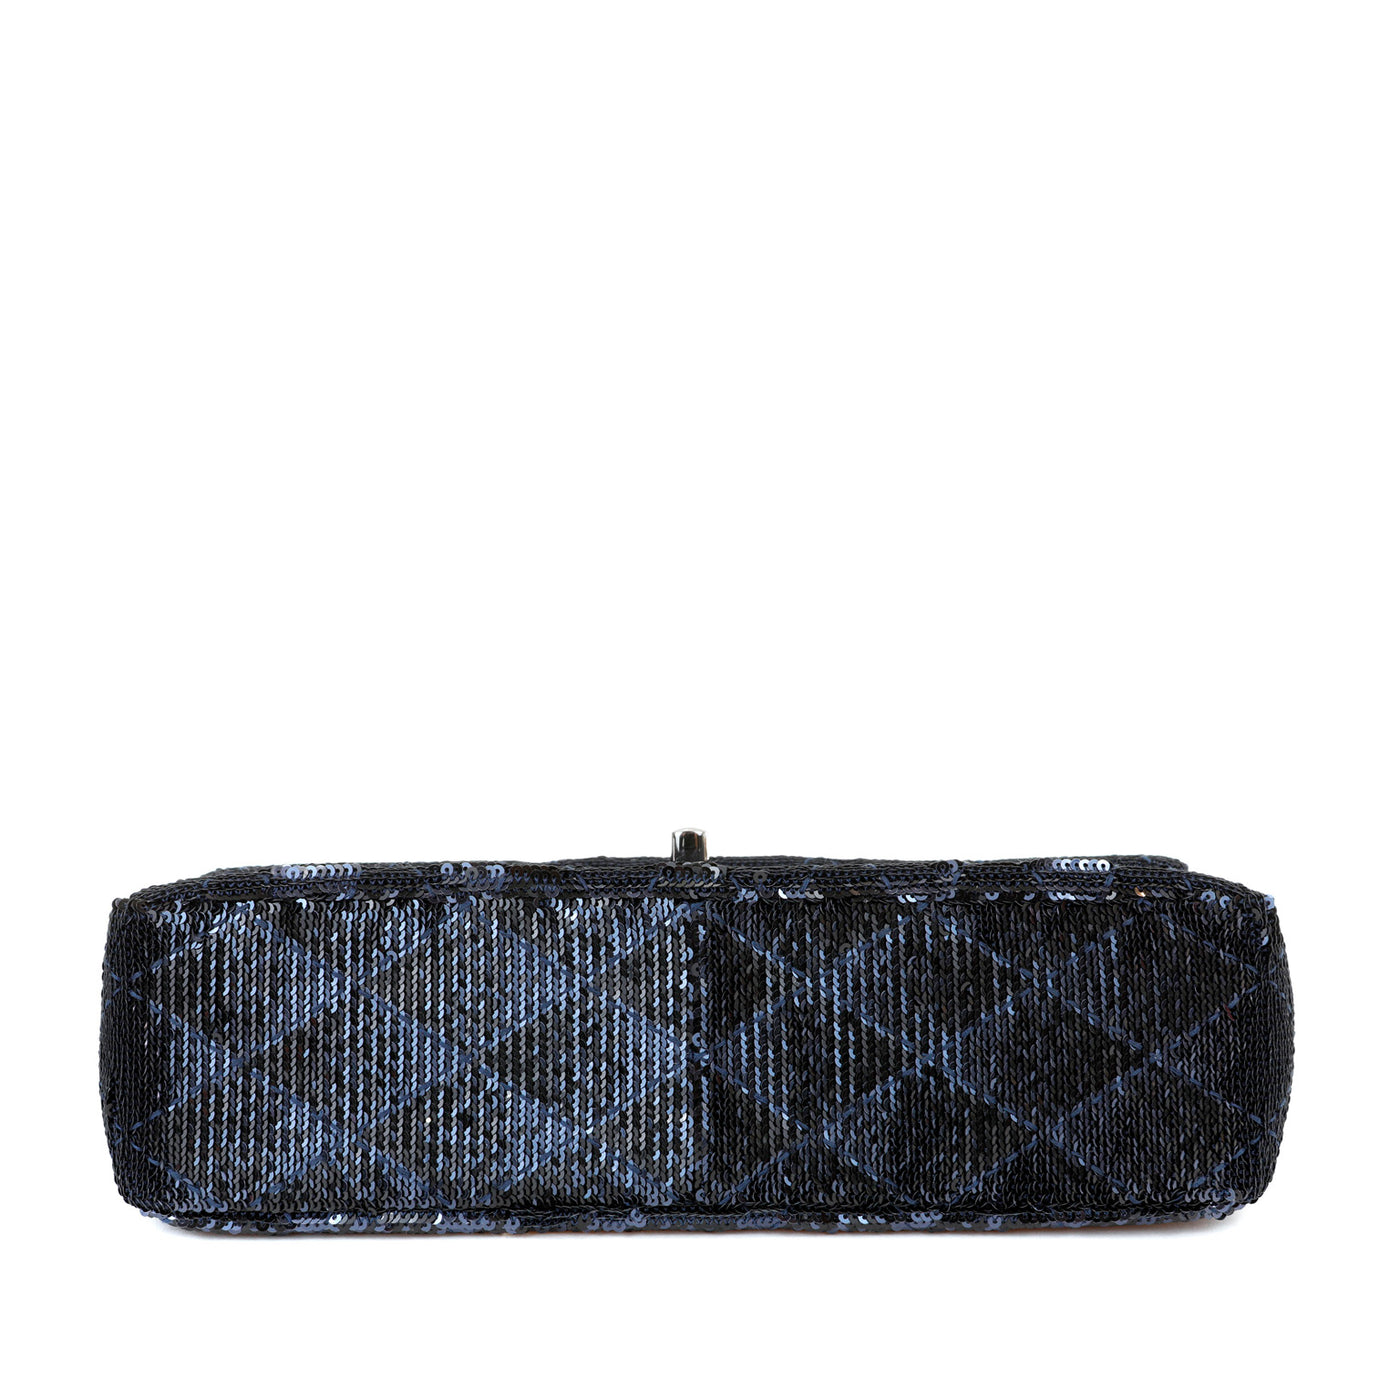 Chanel Black/Navy Sequin Classic Flap Bag w/ Silver Hardware